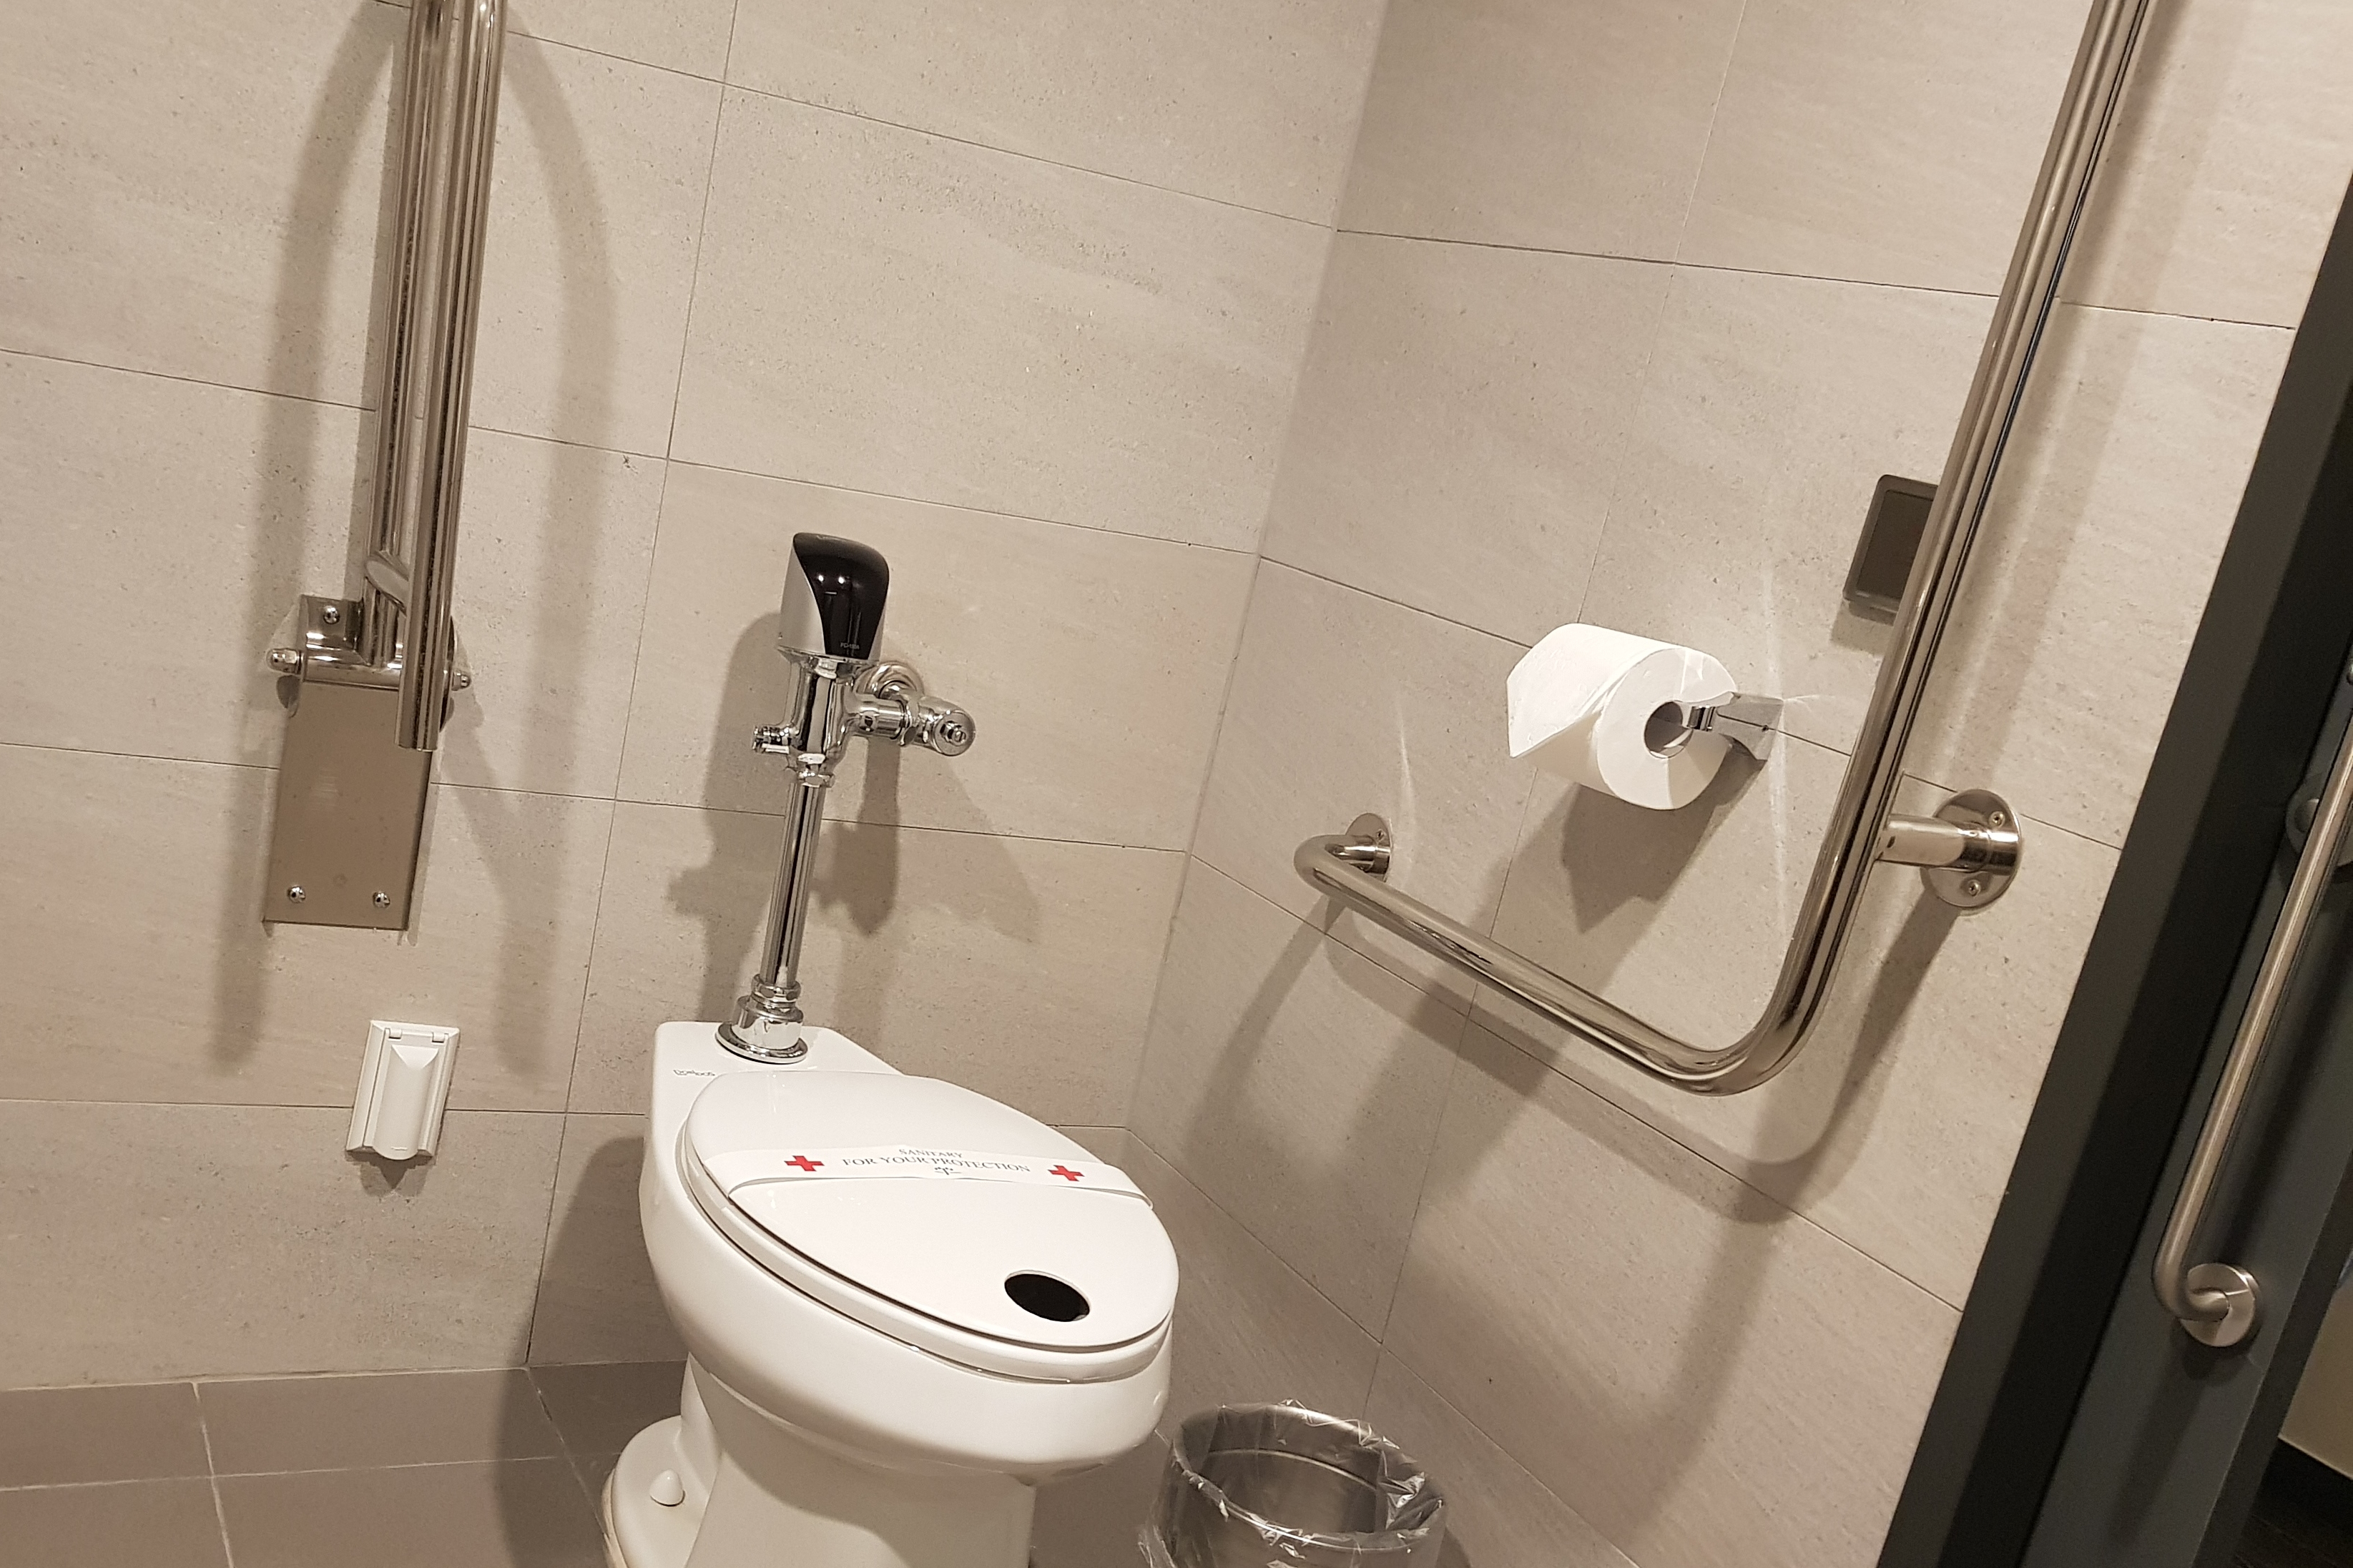 Bathroom  0 : Restrooms of the Hotel Thomas Myengdong equipped with grab bars
